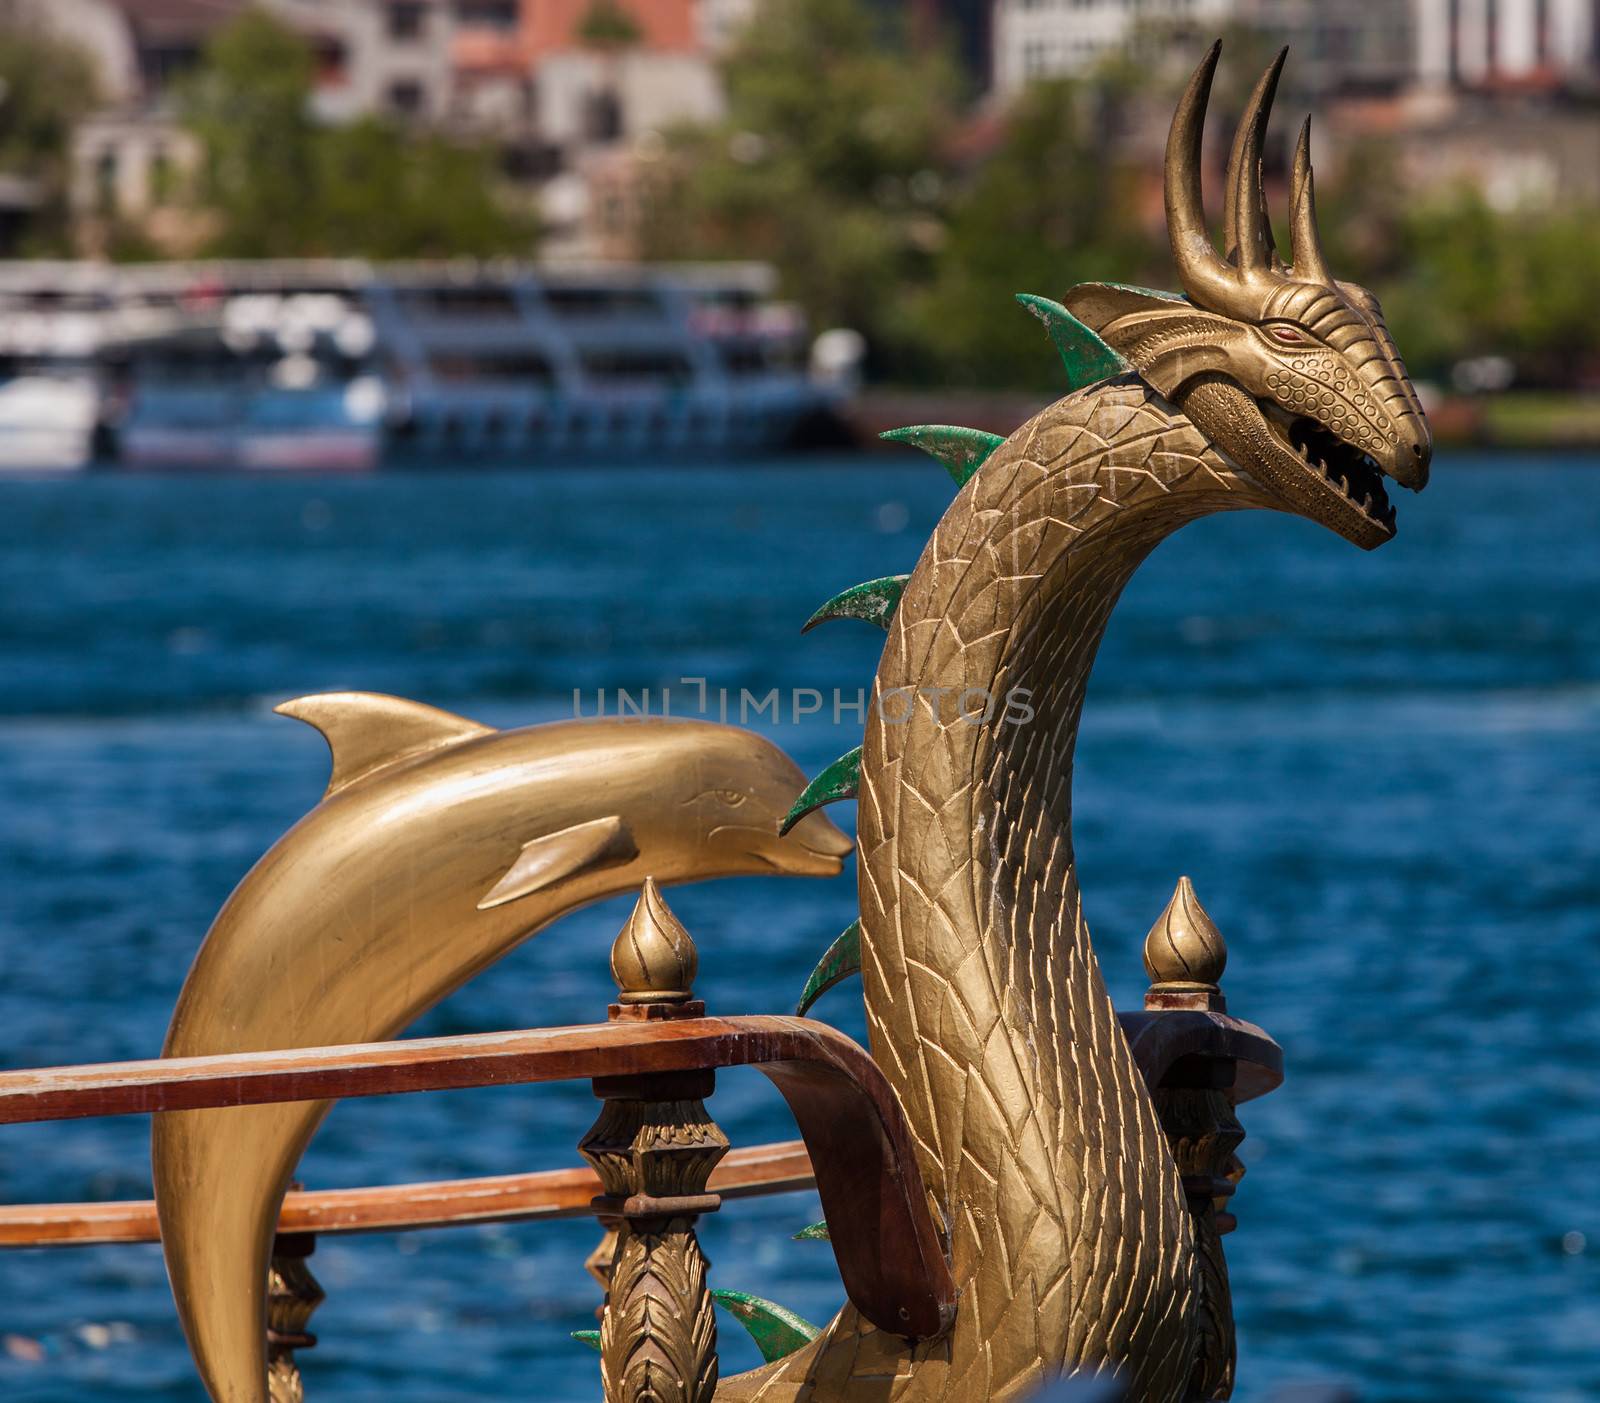 Ornate Boat Decorations on the Bosphorus in Istanbul